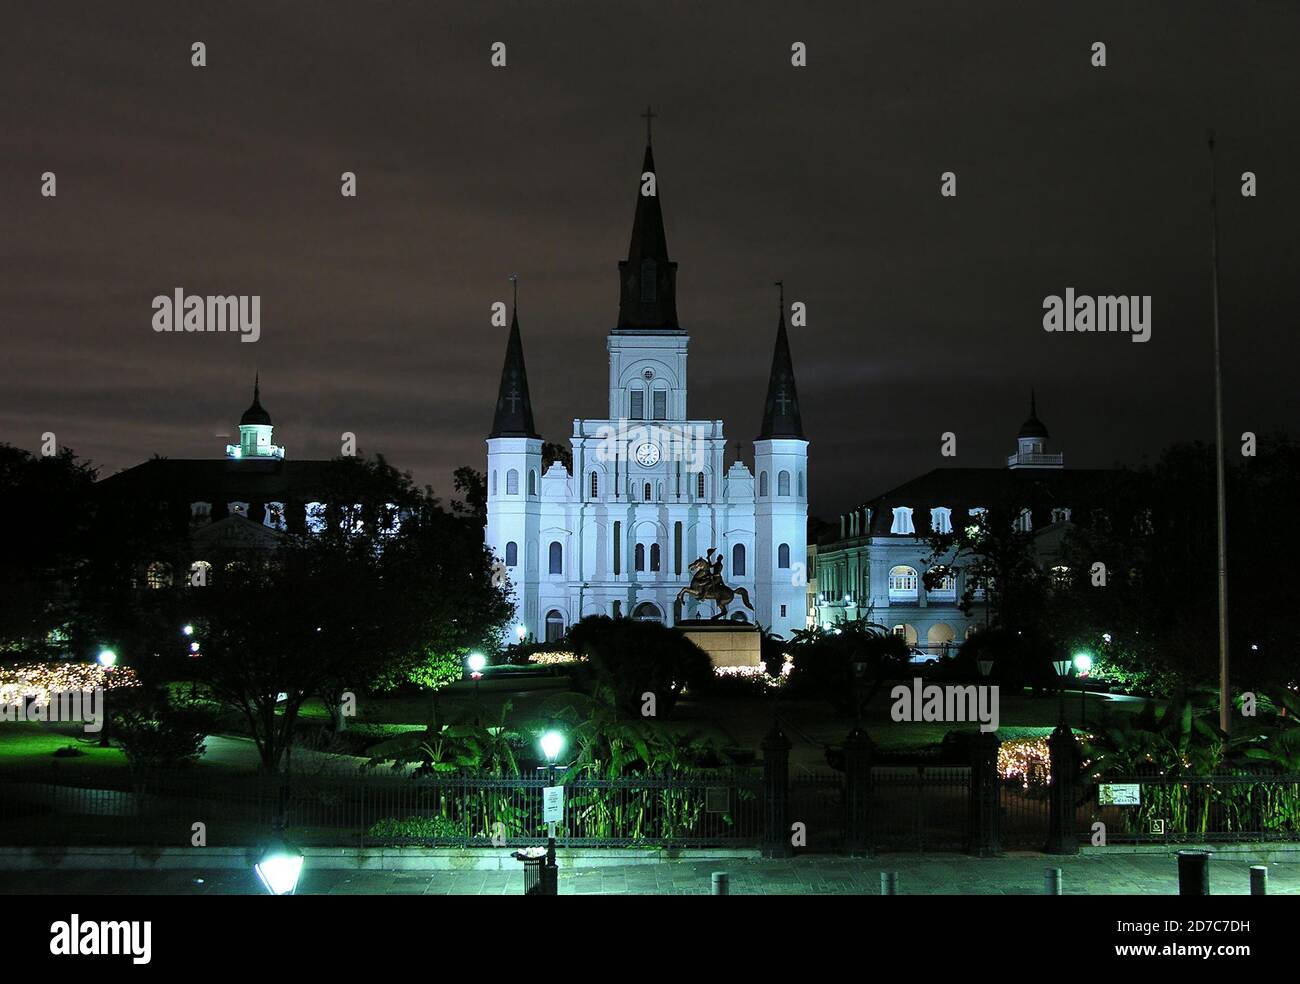 NEW ORLEANS, LOUISIANA  - DECEMBER 7, 2005:  Archival night view of St Louis Cathedral in the historic French Quarter of New Orleans. Stock Photo